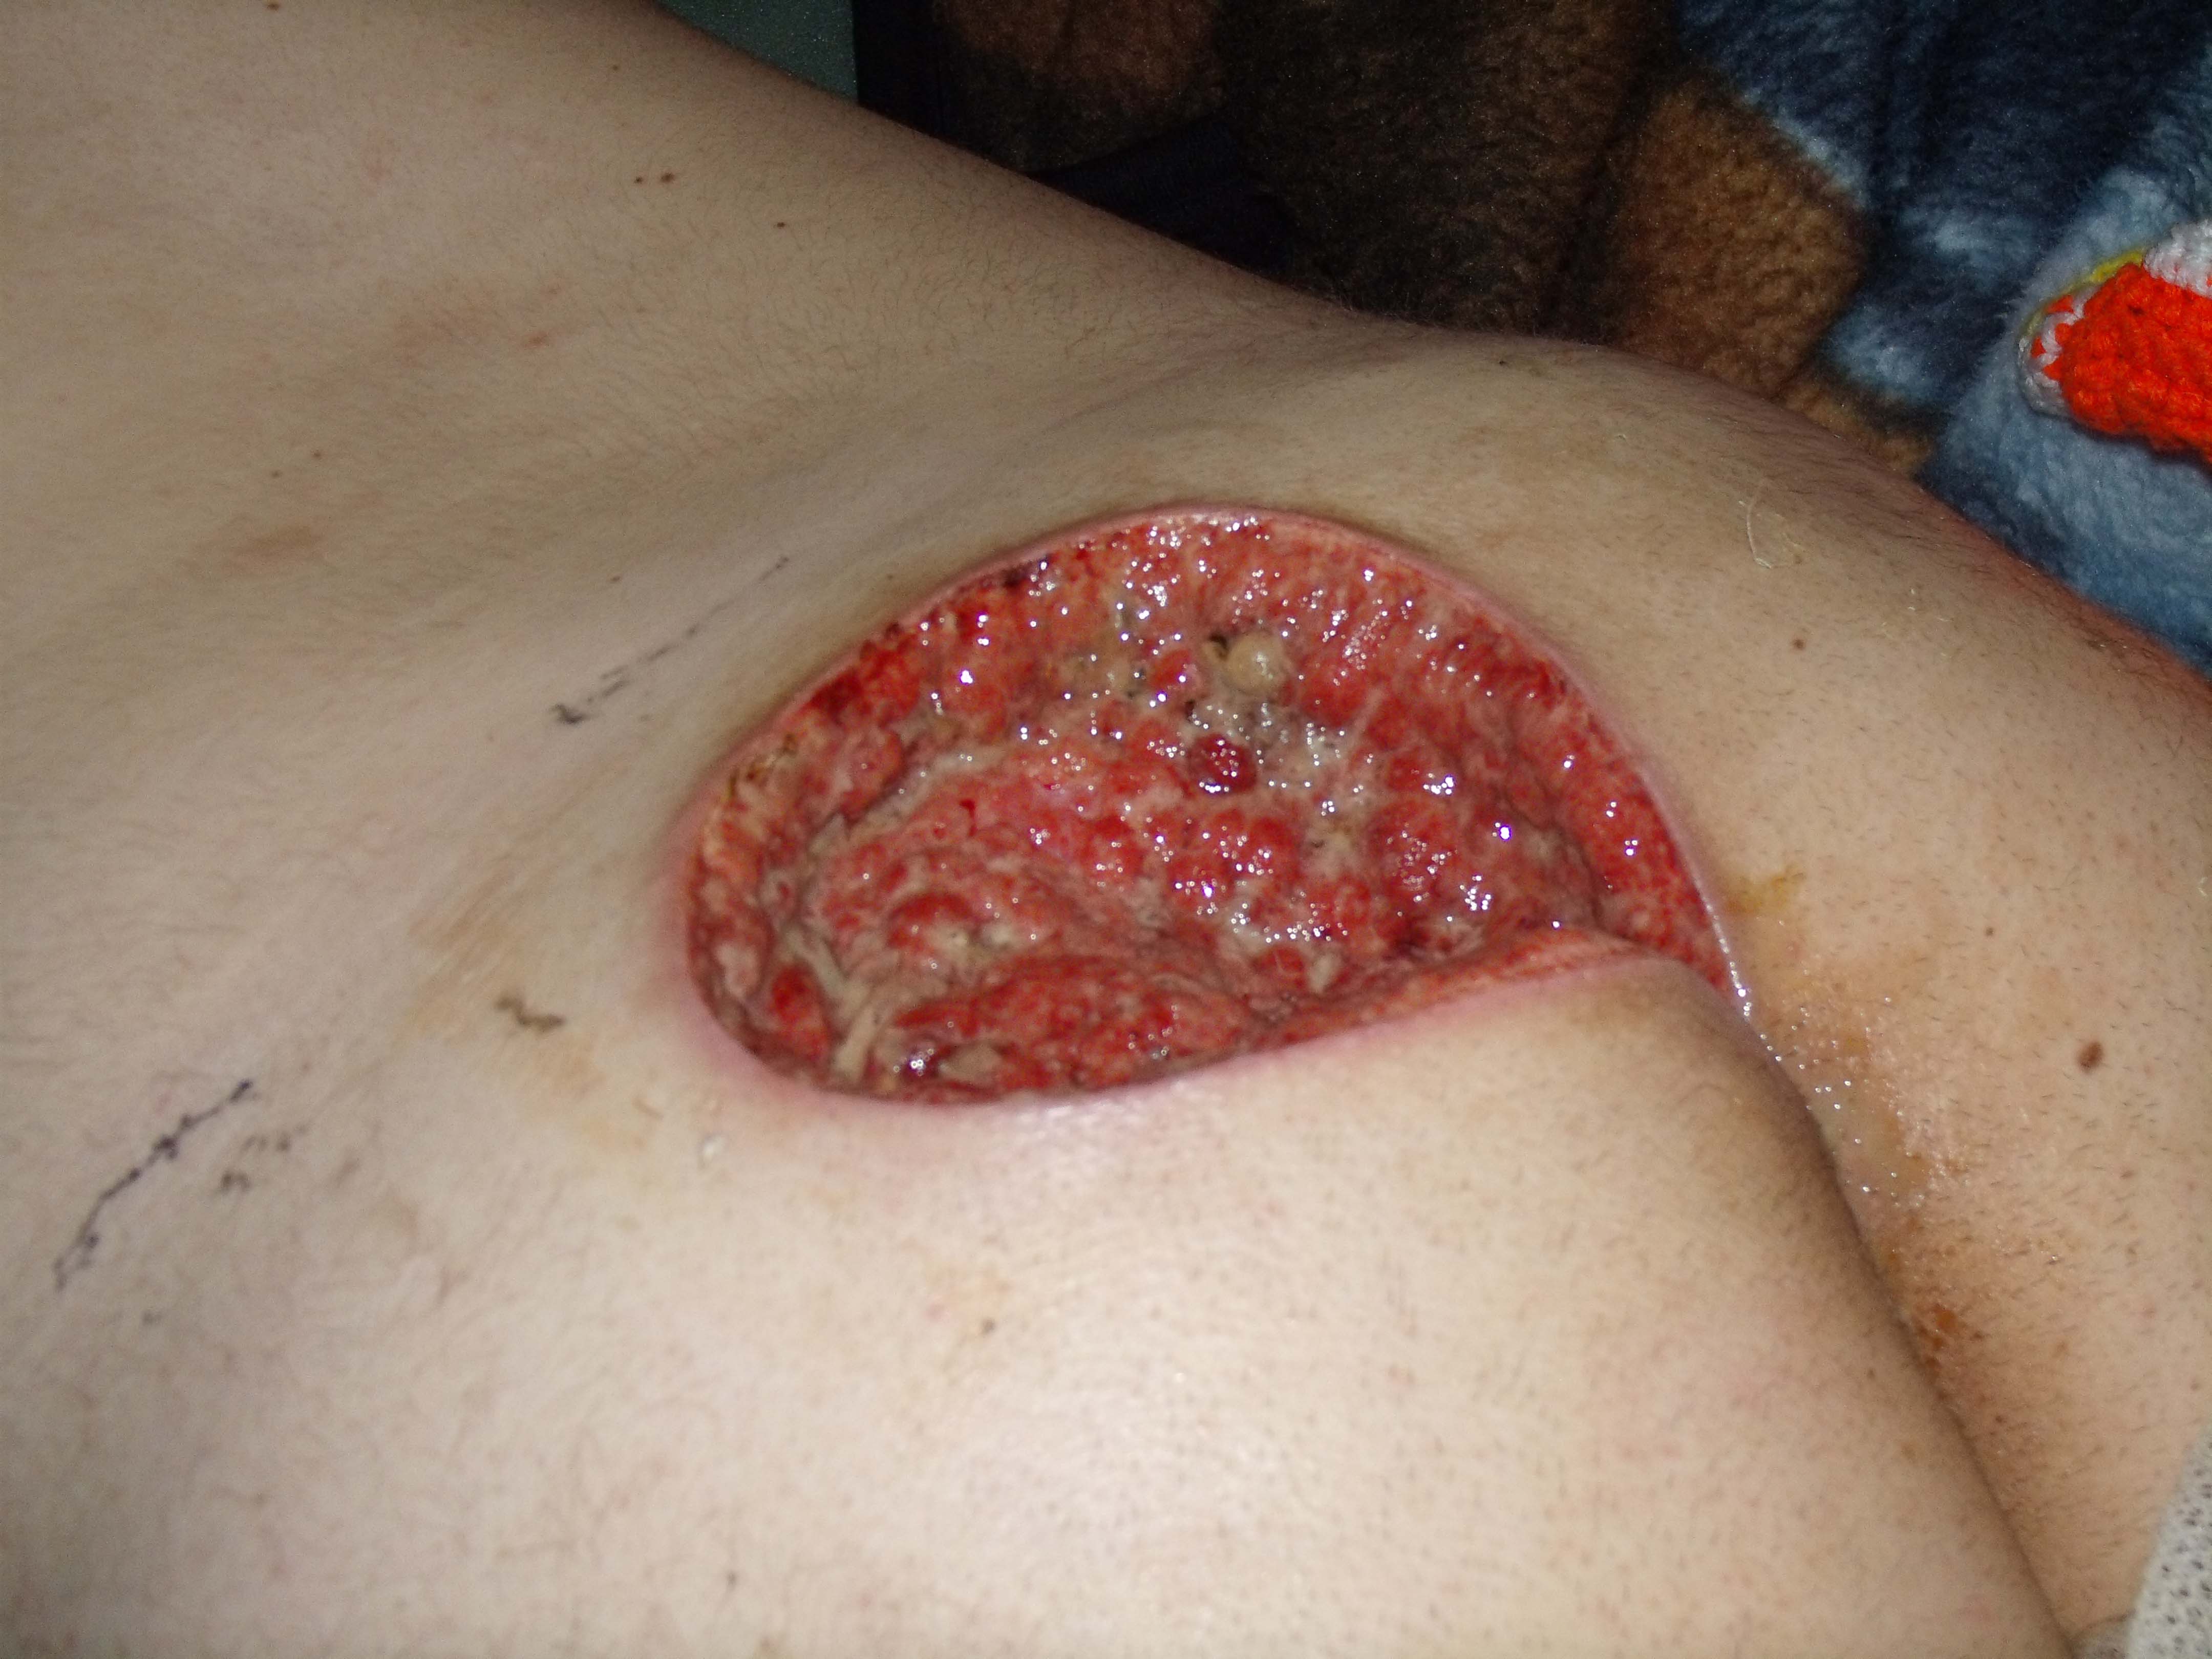 How To Get Rid Of A Pilonidal Cyst, Part Ii